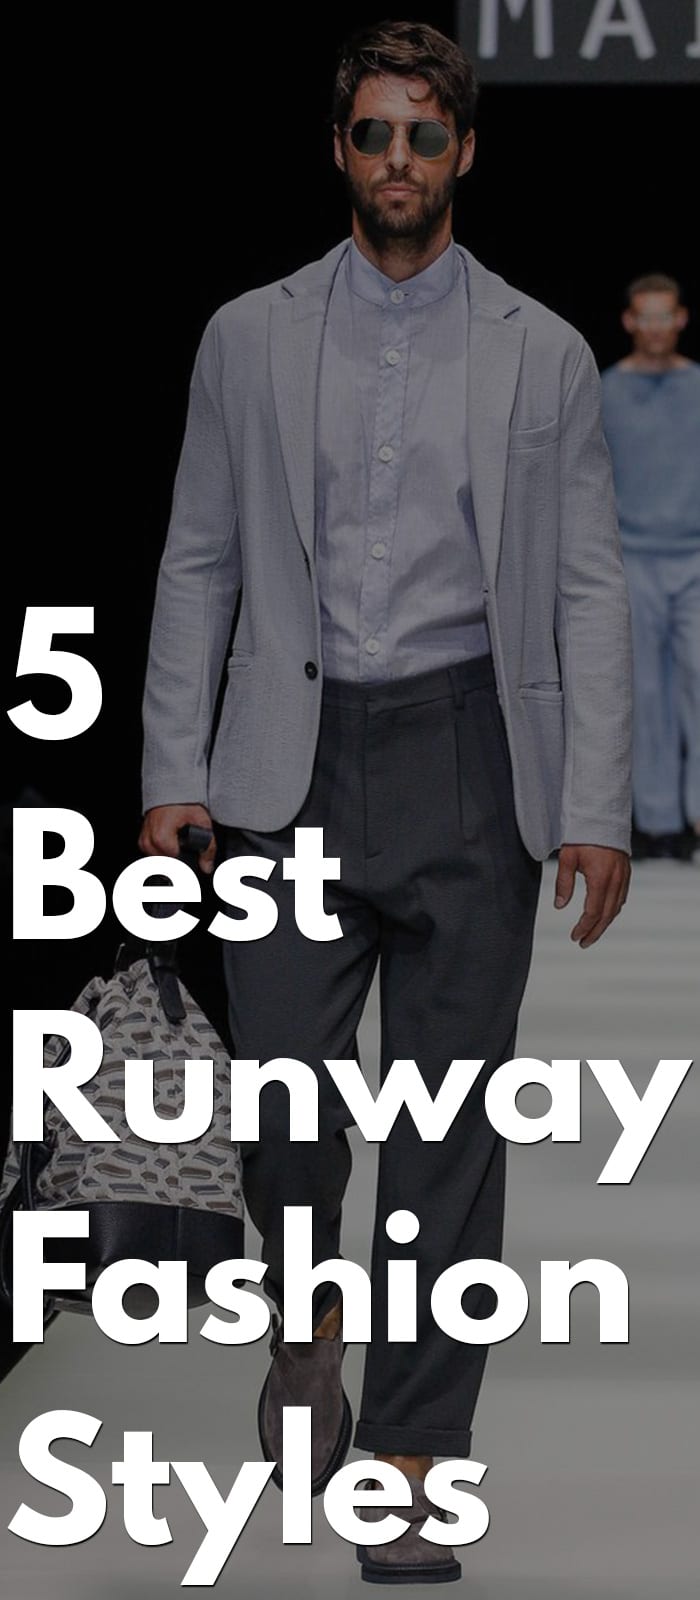 5 Best Runway Fashion Styles for 2018